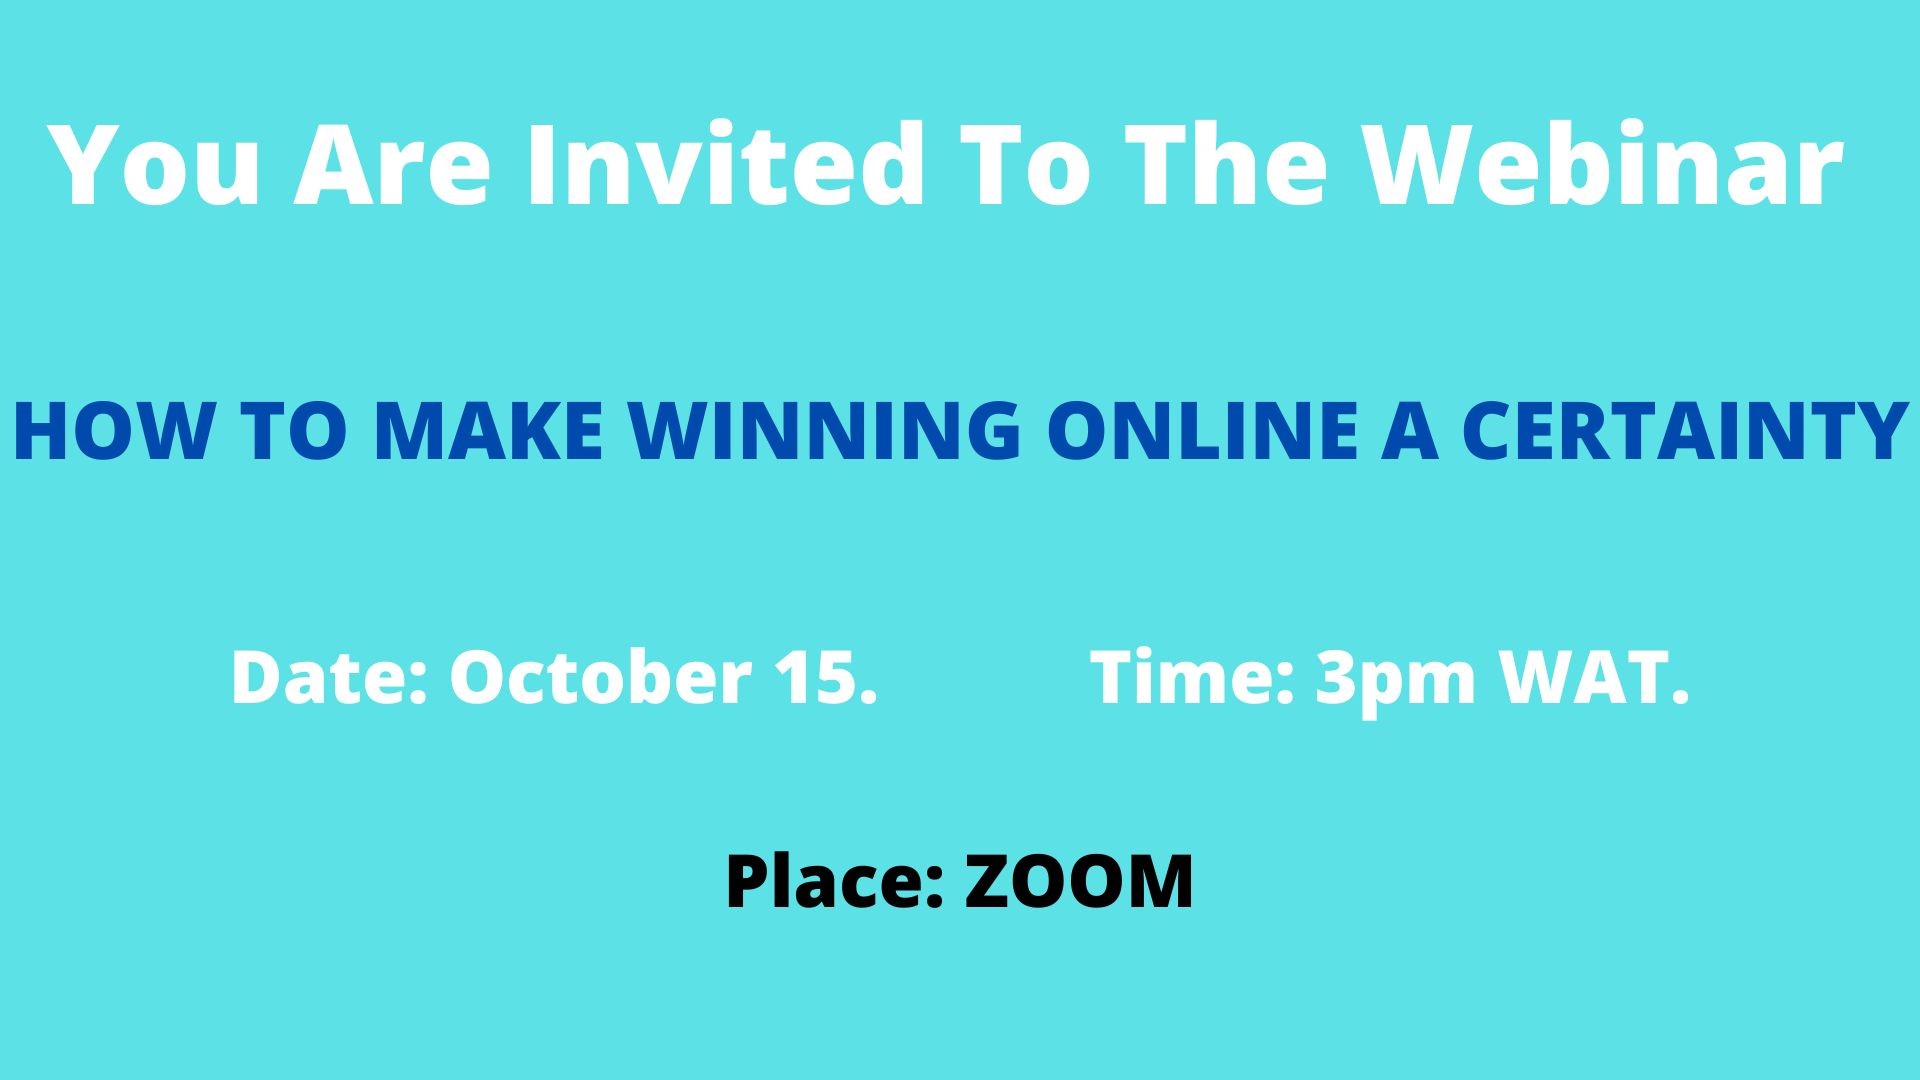 How To Make Winning Online A Certainty?